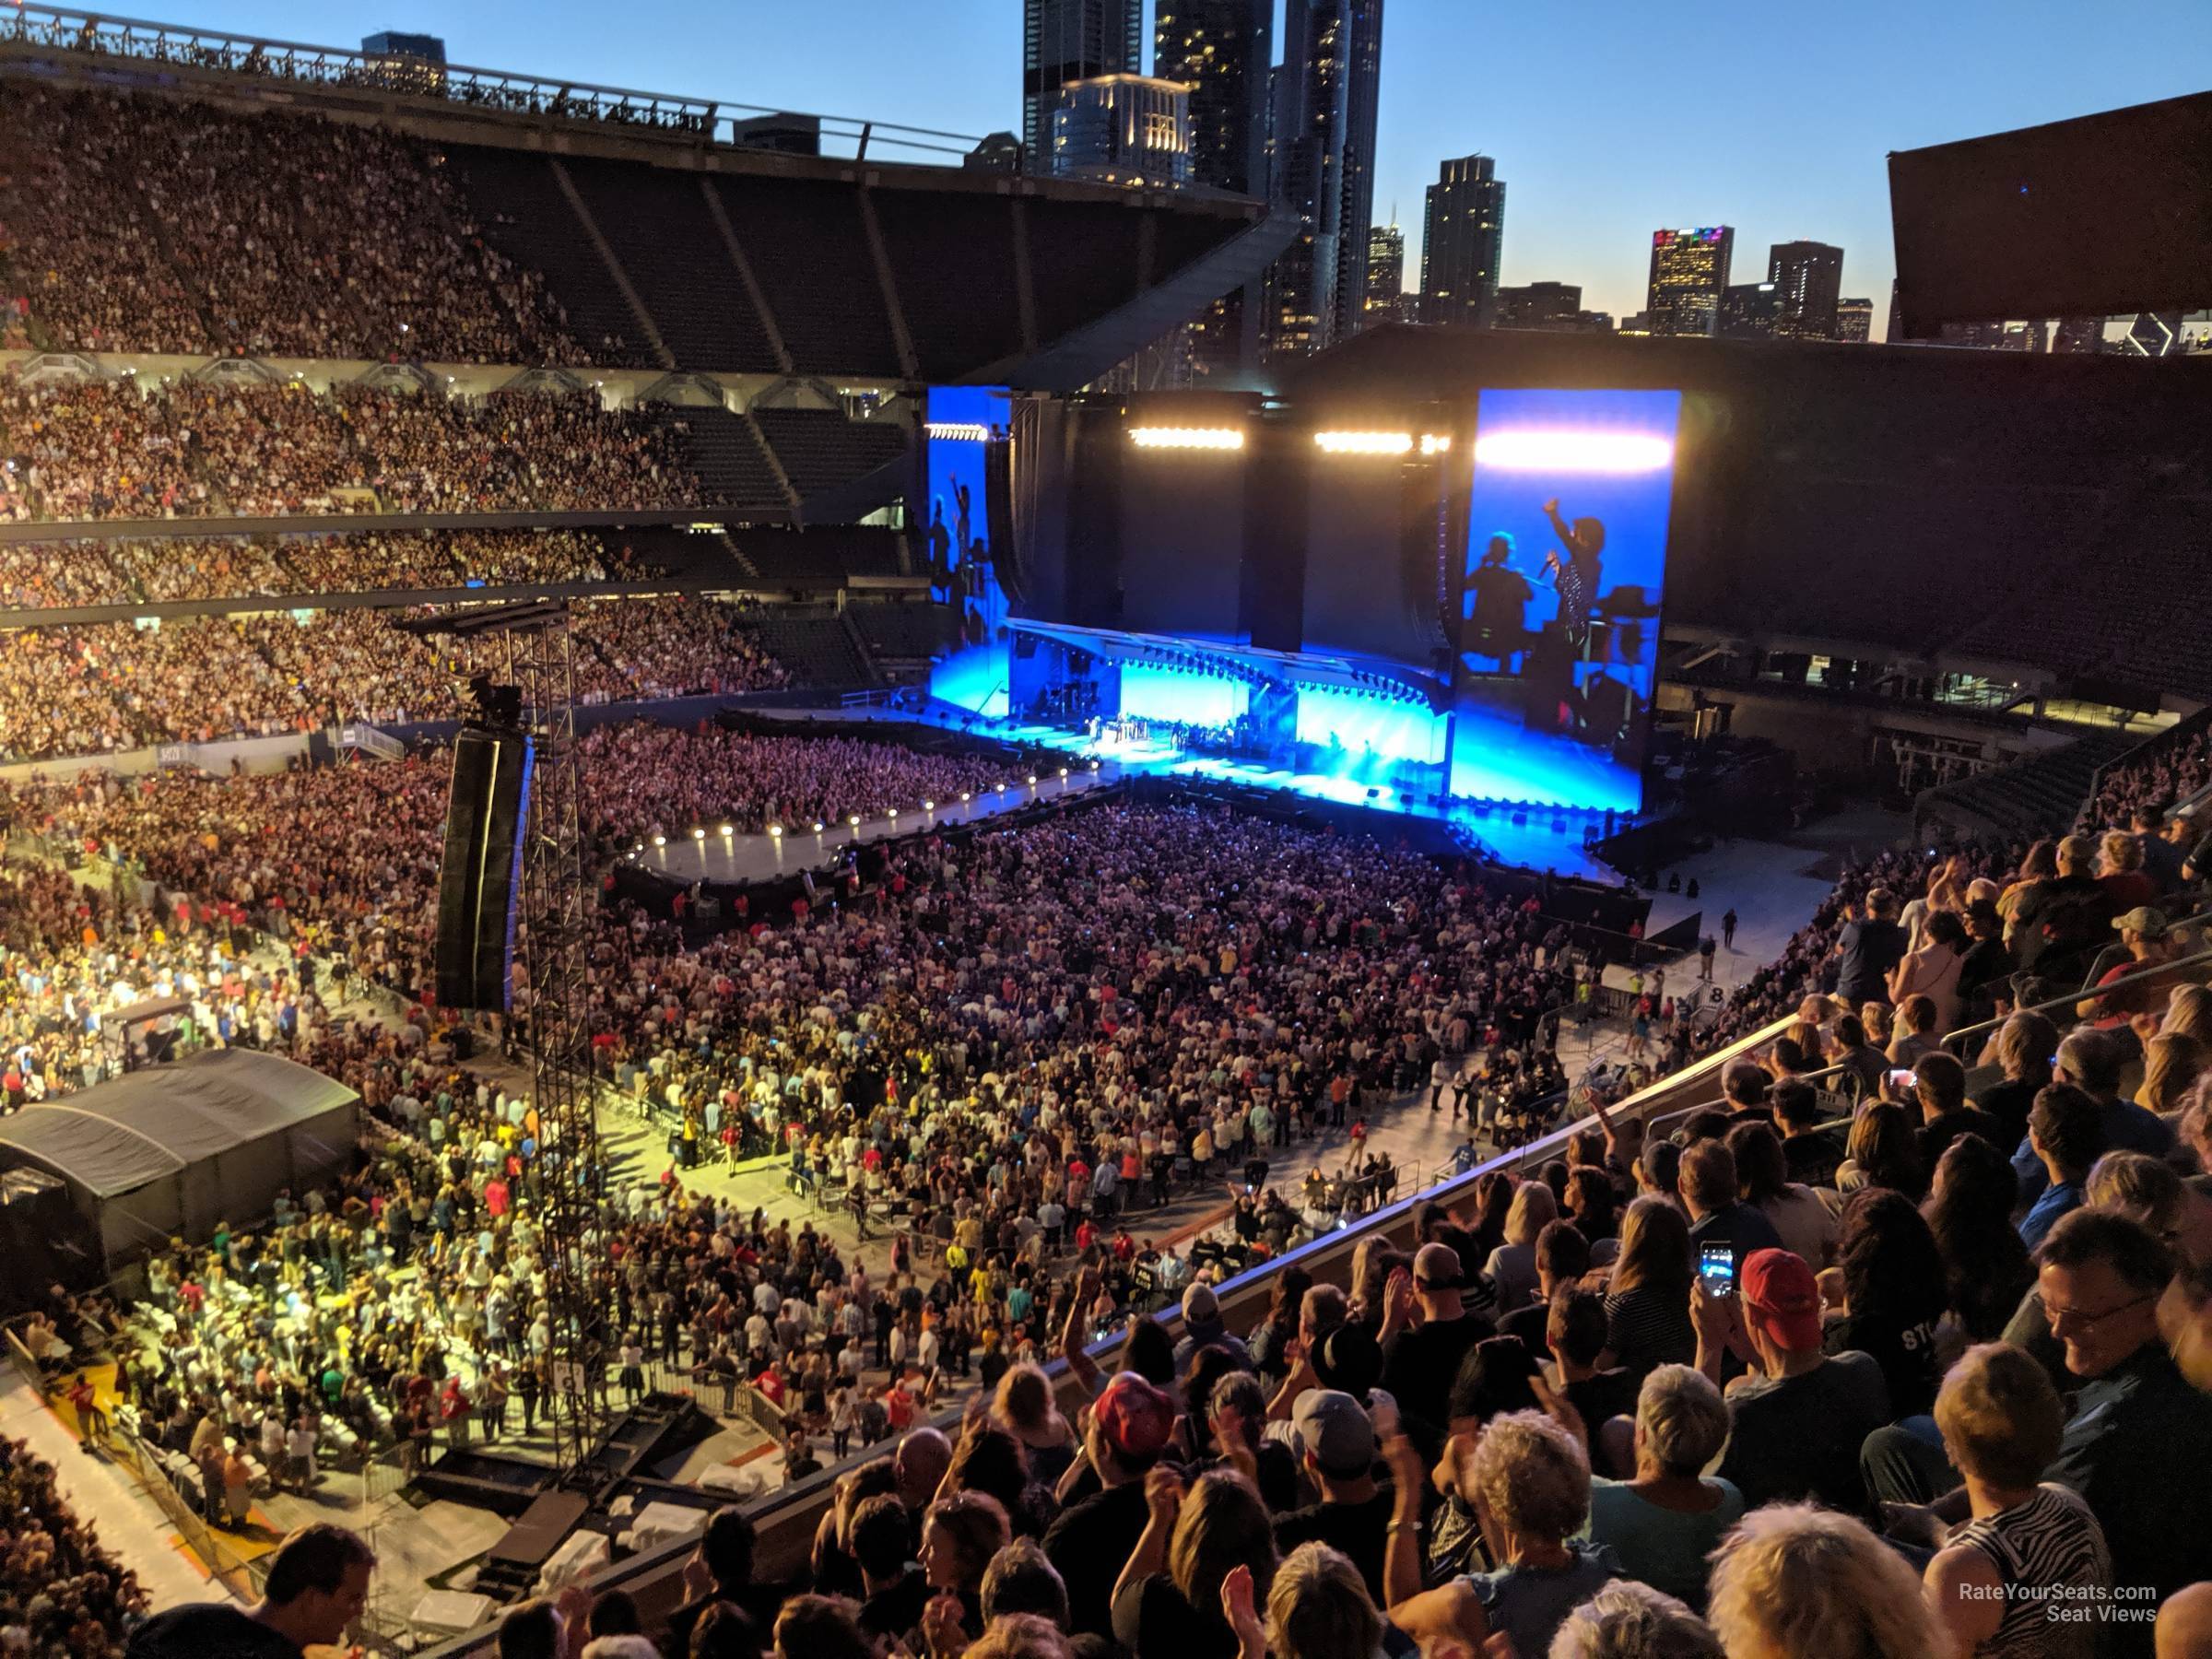 section 311, row 12 seat view  for concert - soldier field